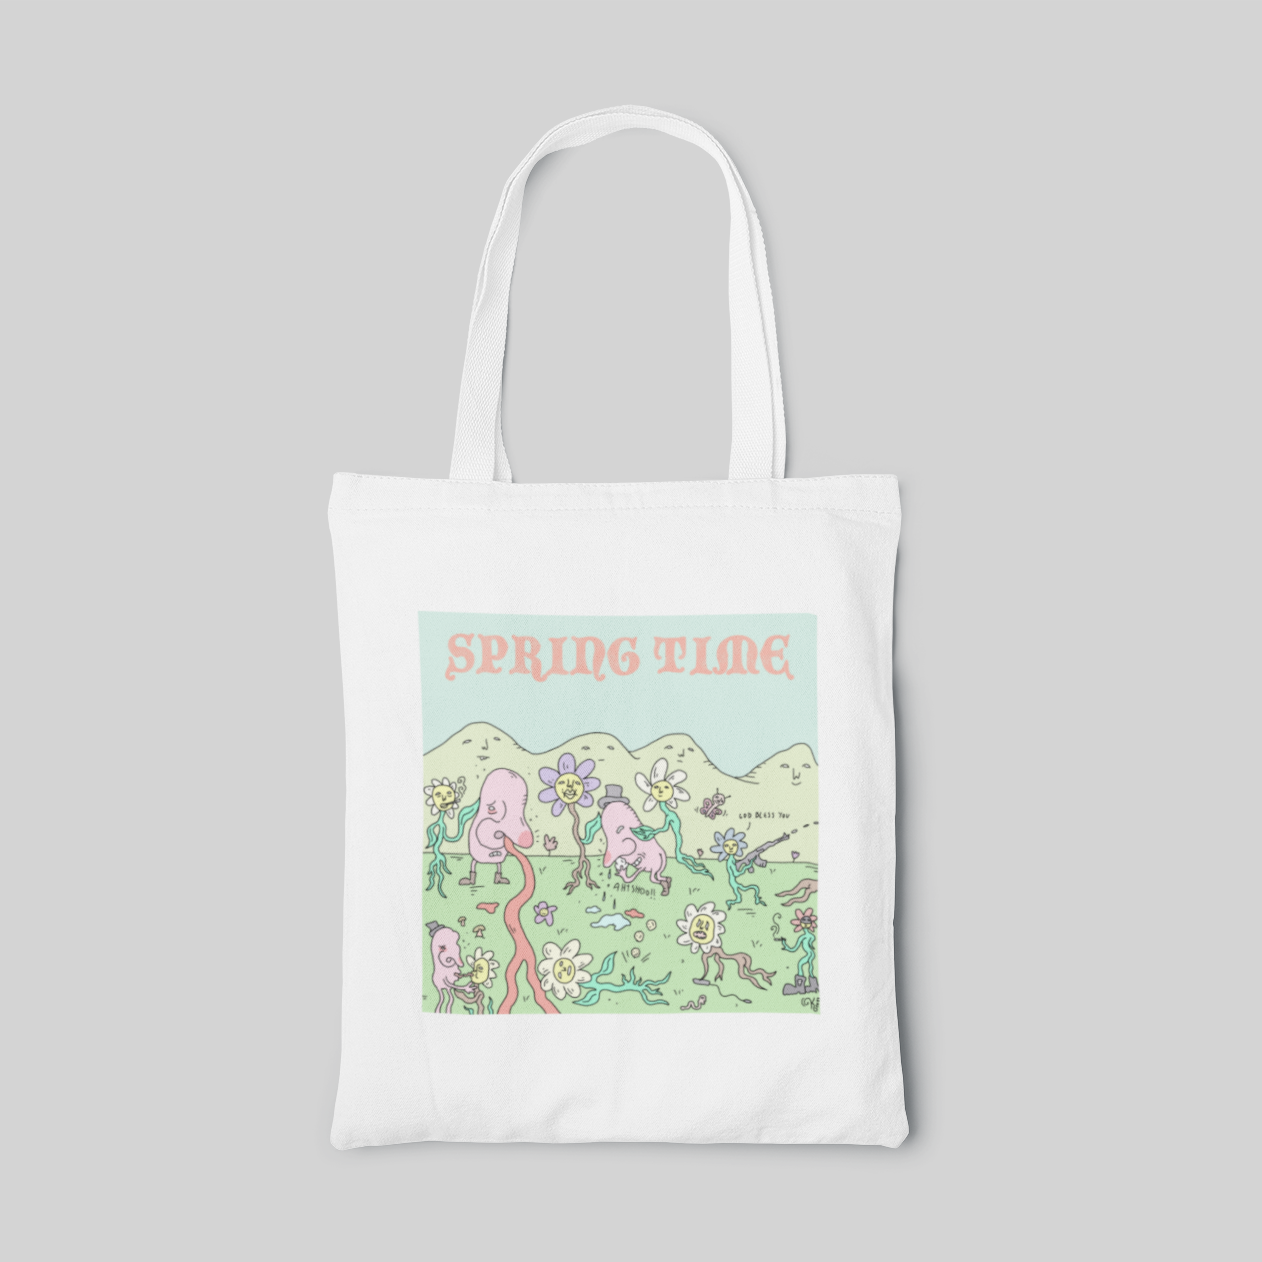 White tote bag with pastel green nature illustration